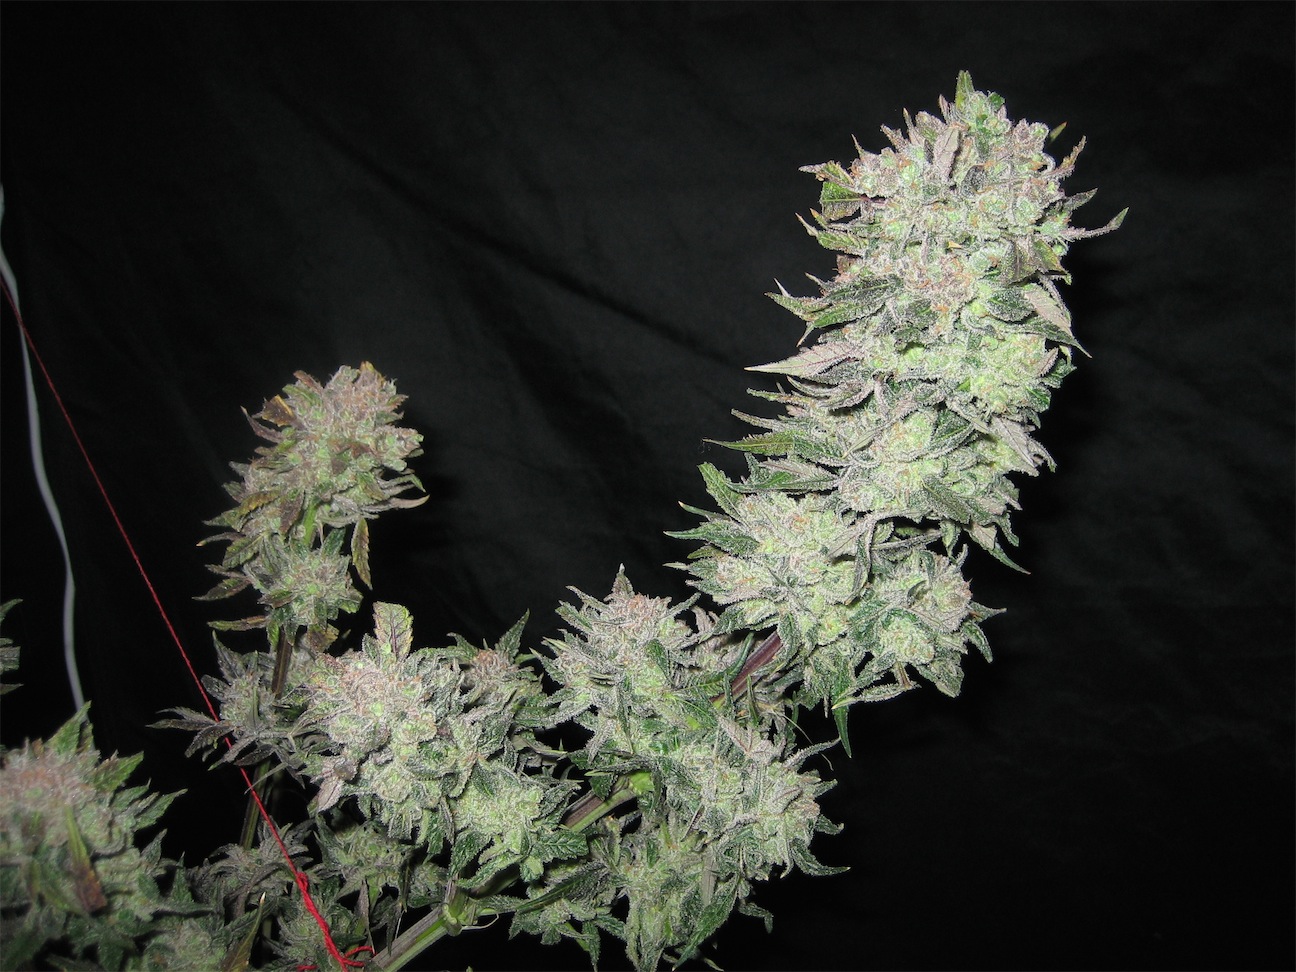 Frosty leaves dutch passion